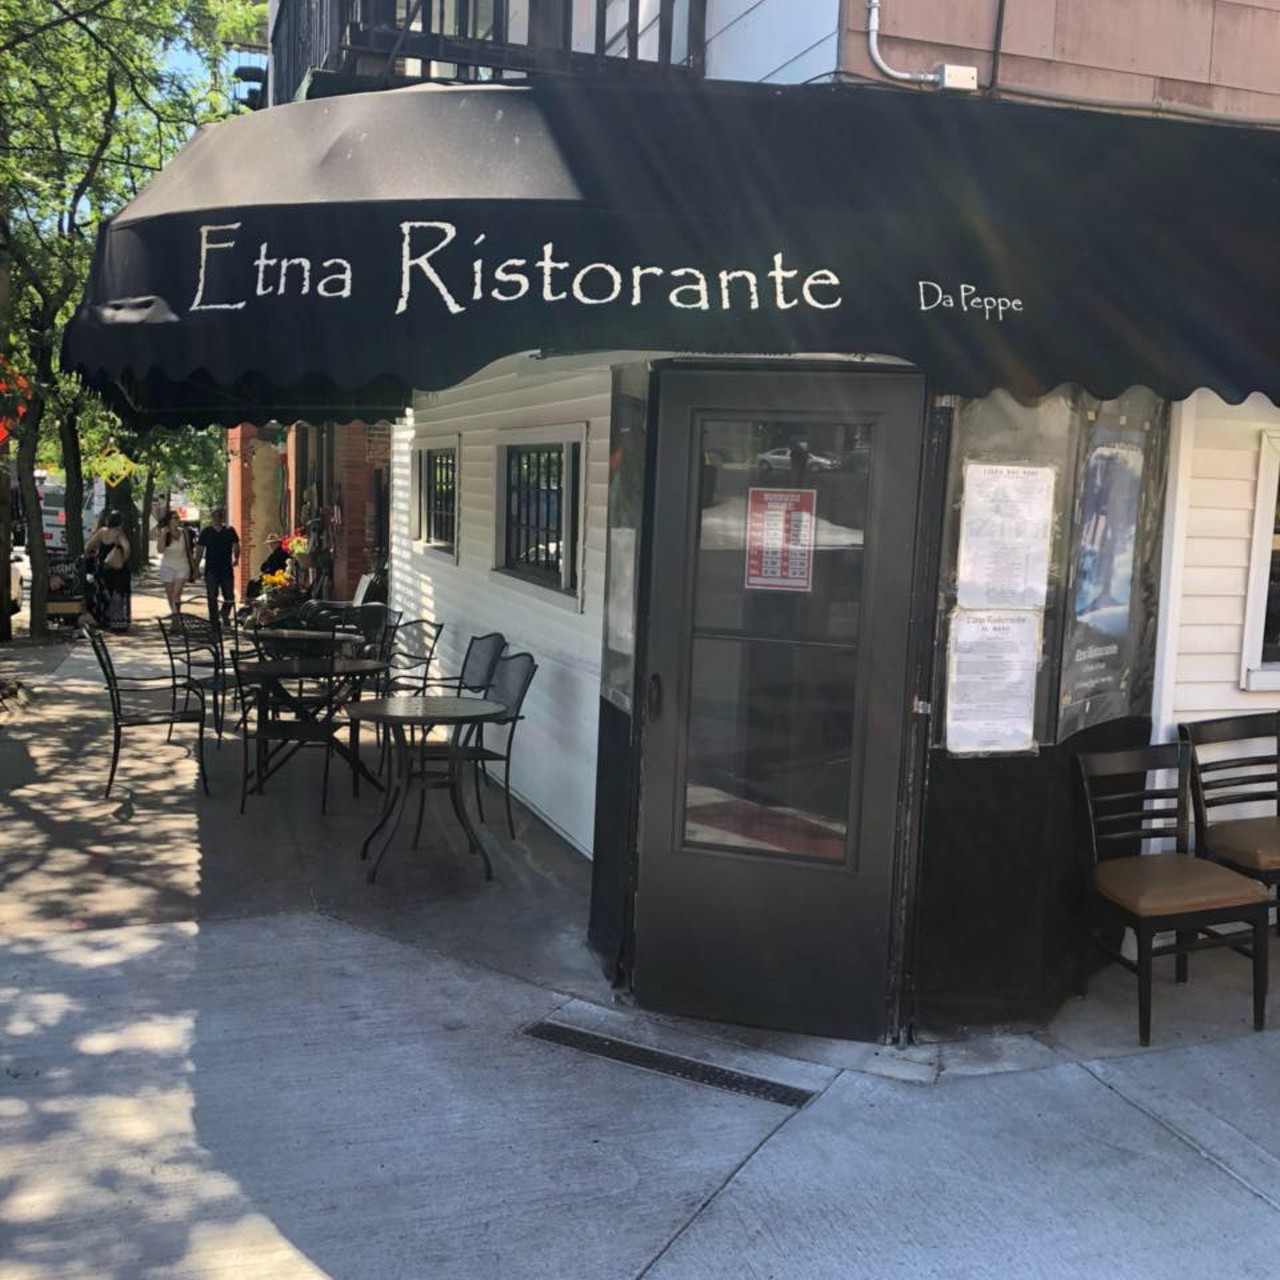  Etna
11919 Mayfield Rd., Cleveland
This romantic, tightly packed Little Italy spot is one of the best Italian restaurants in town. A great wine list, authentic menu items and a dark ambience recalls the Old Country that created this remarkable cuisine.